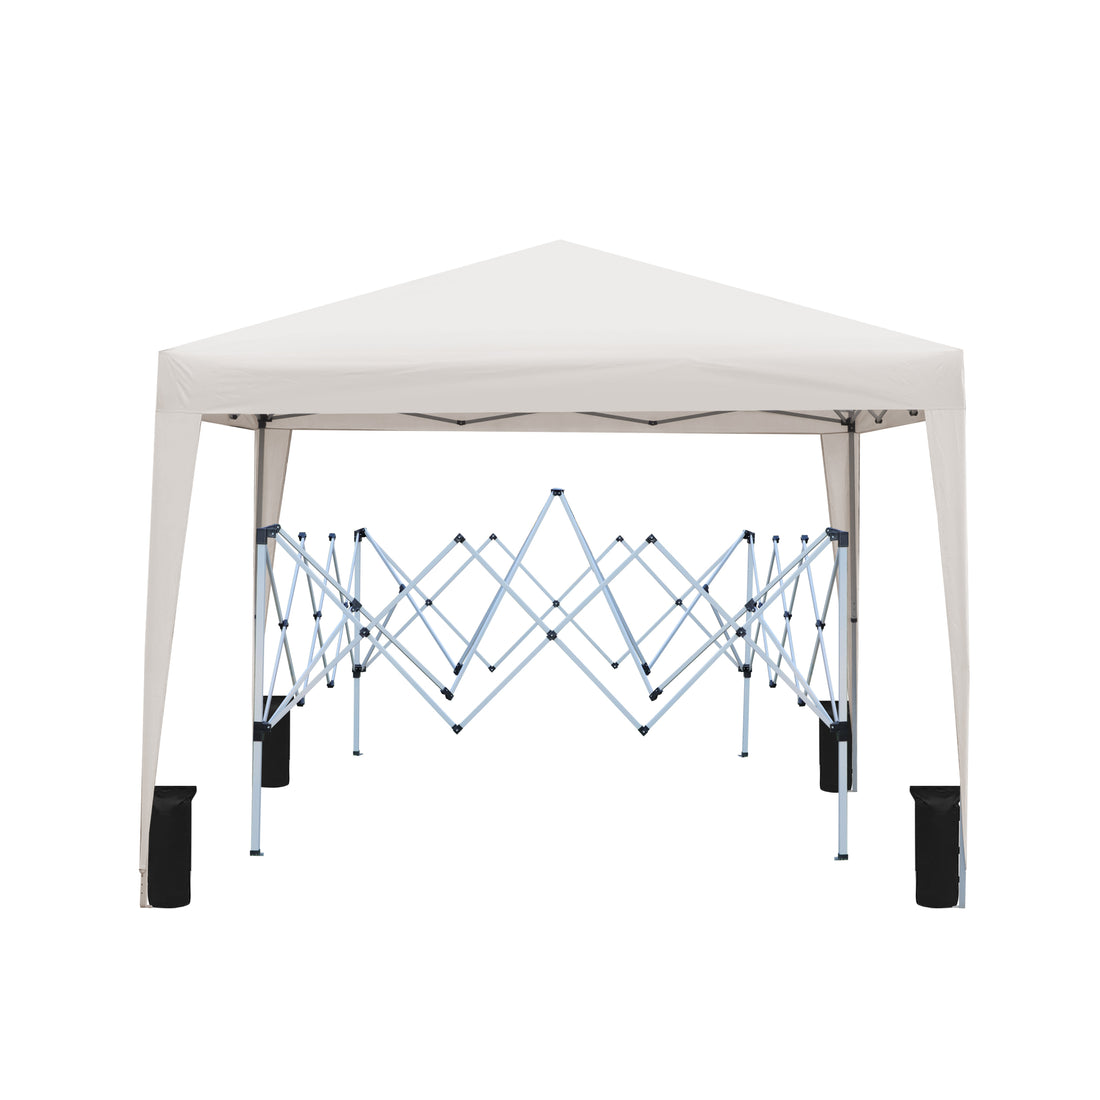 Outdoor 10x 10Ft Pop Up Gazebo Canopy Tent with 4pcs beige-metal